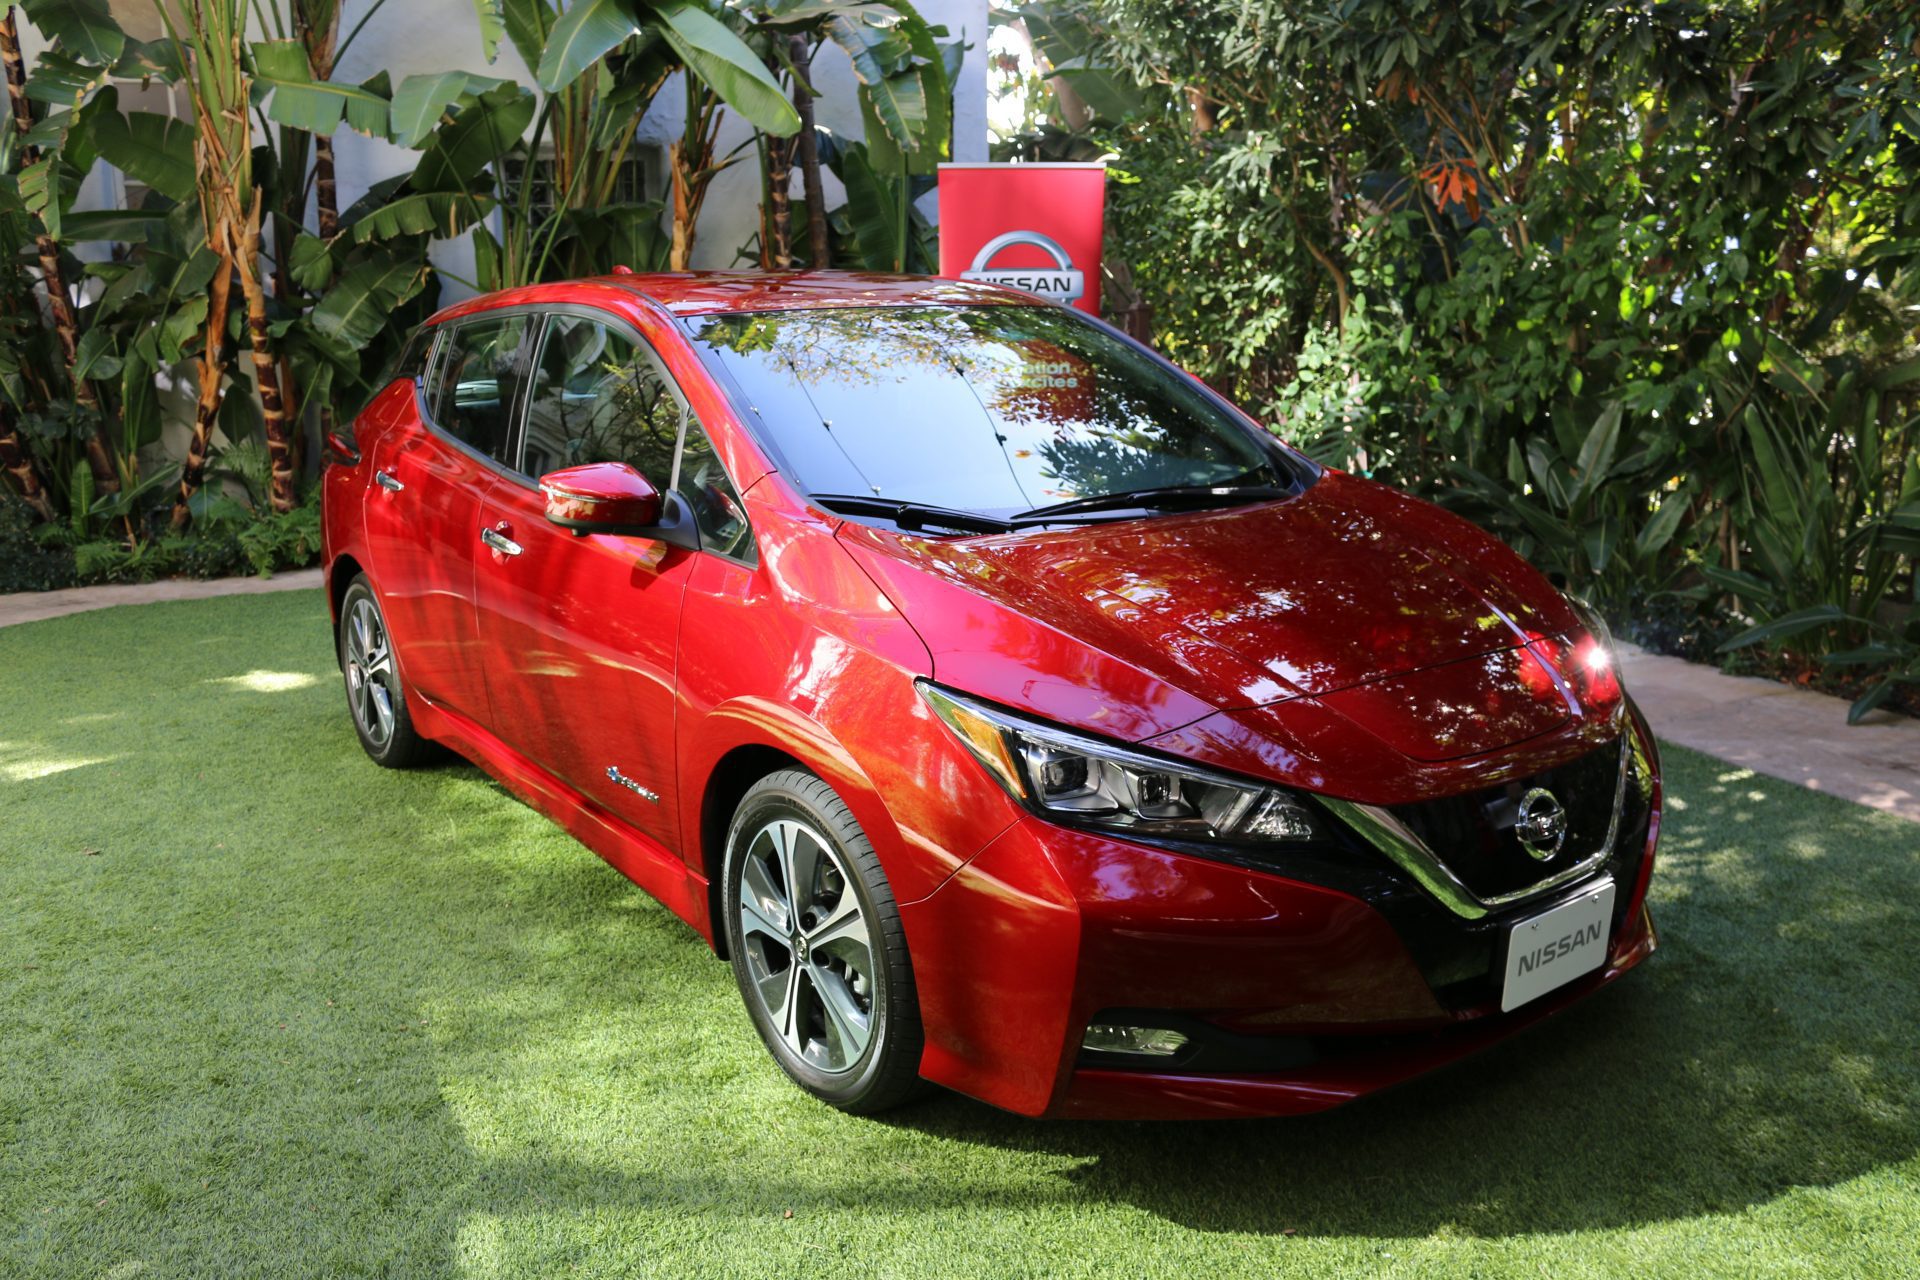 5 reasons the Nissan LEAF complements your lifestyle